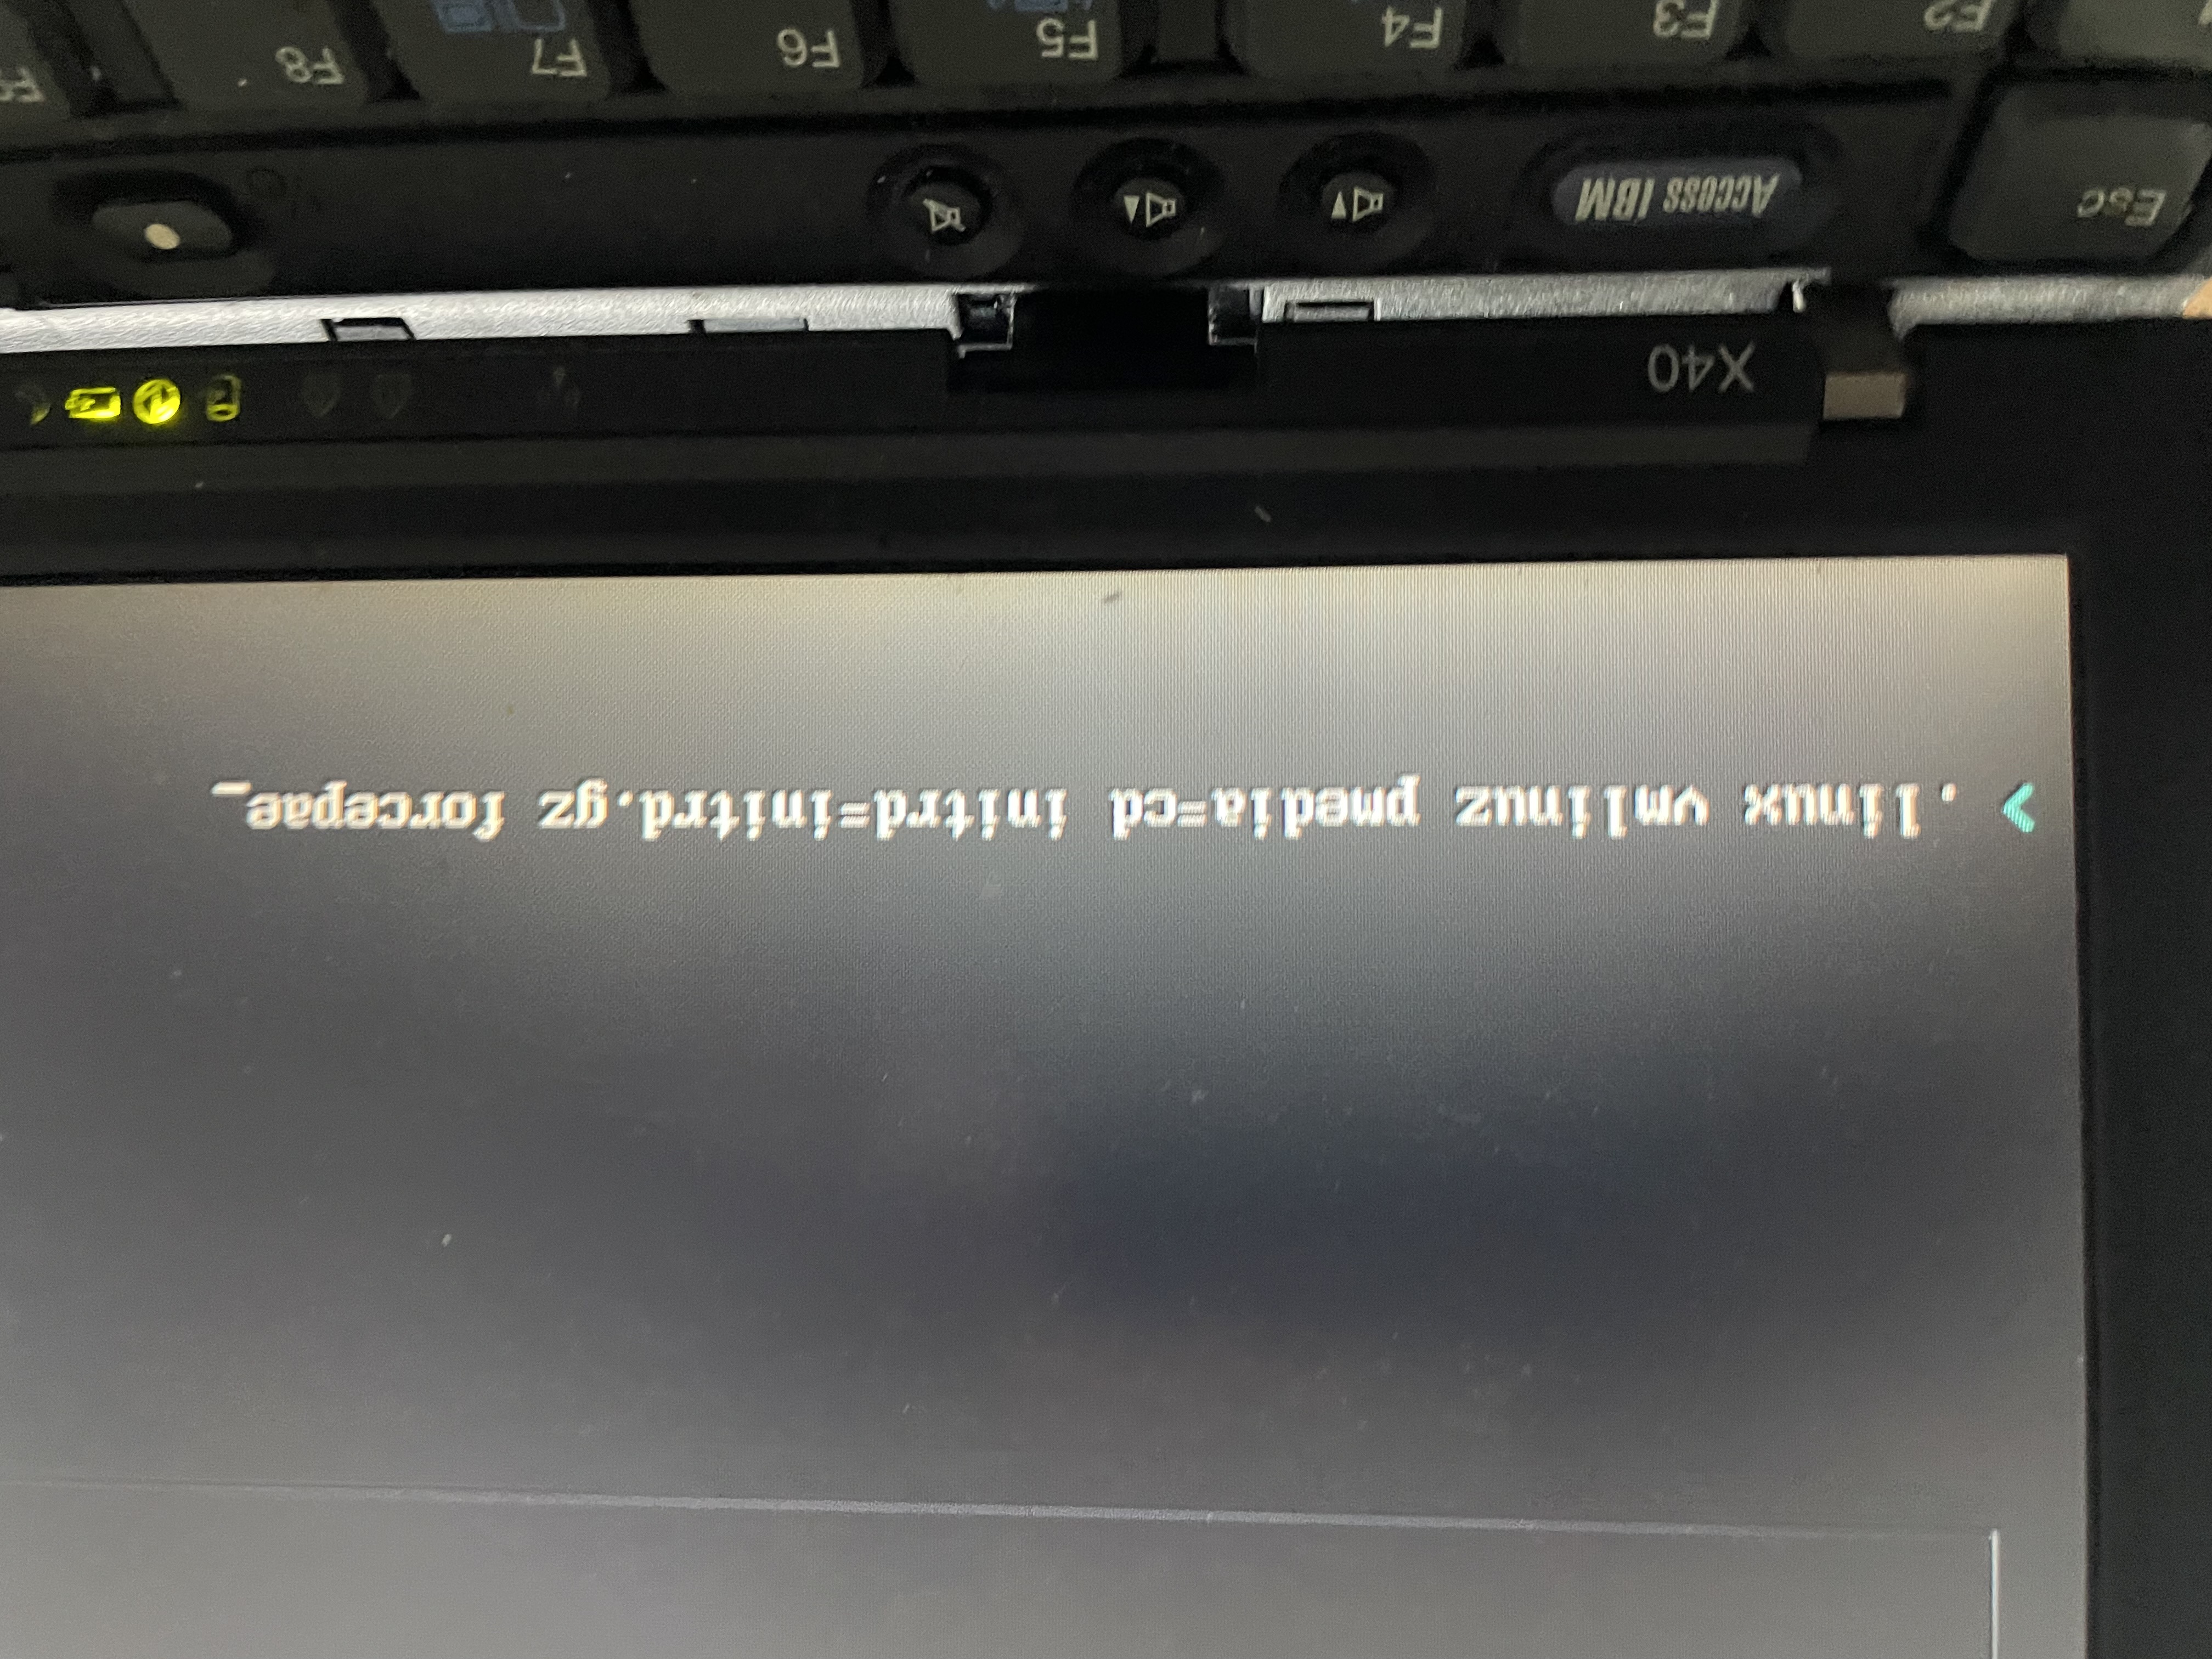 Working boot parameters for forcing pae